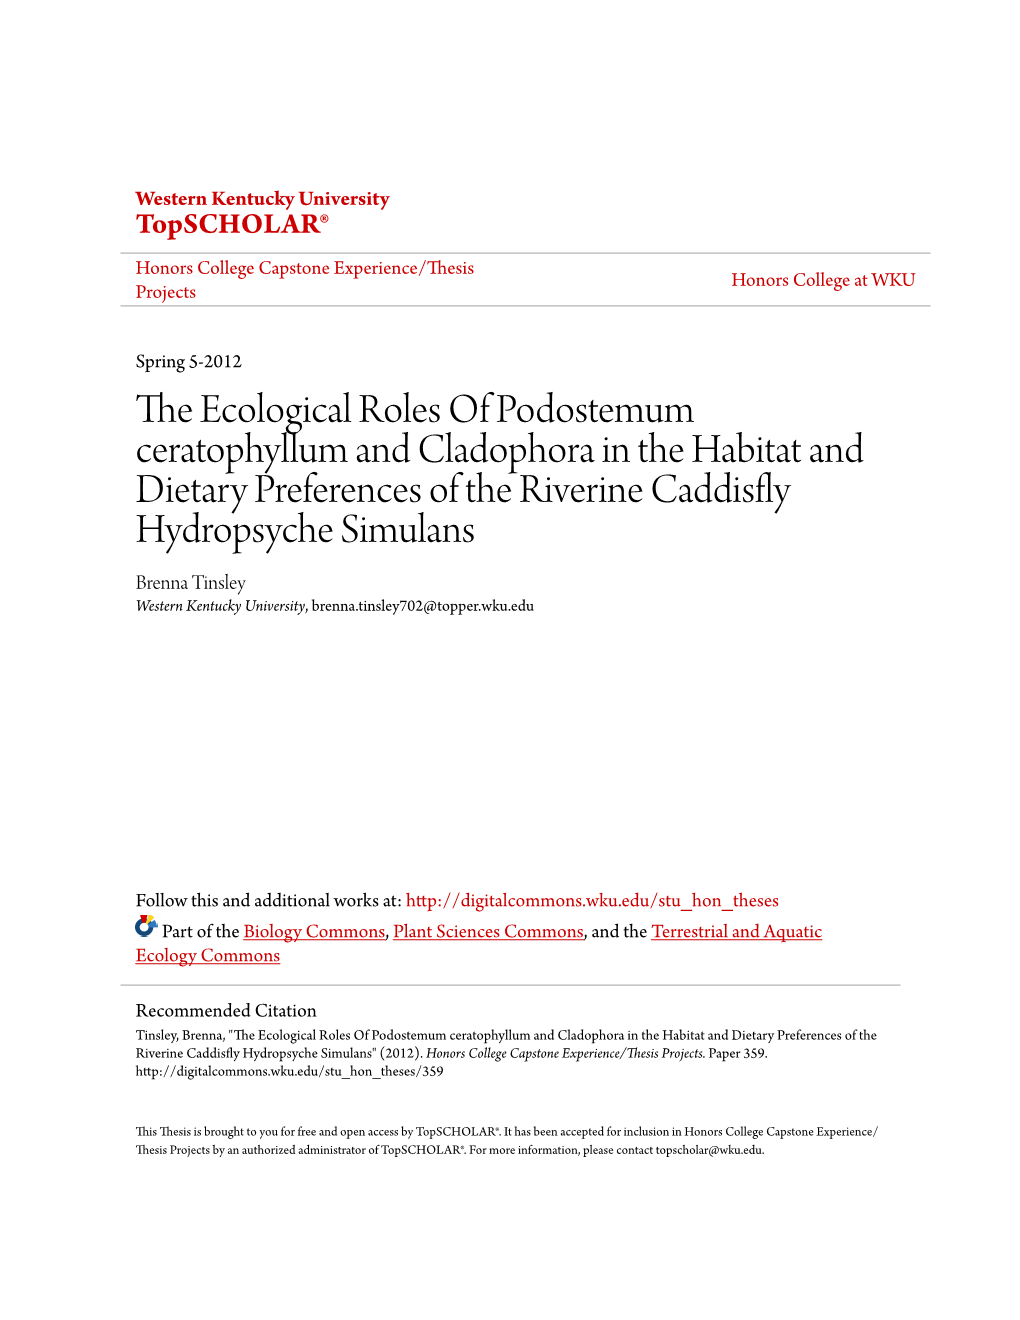 THE ECOLOGICAL ROLES of Podostemum Ceratophyllum and Cladophora in the HABITAT and DIETARY PREFERENCES of the RIVERINE CADDISFLY Hydropsyche Simulans